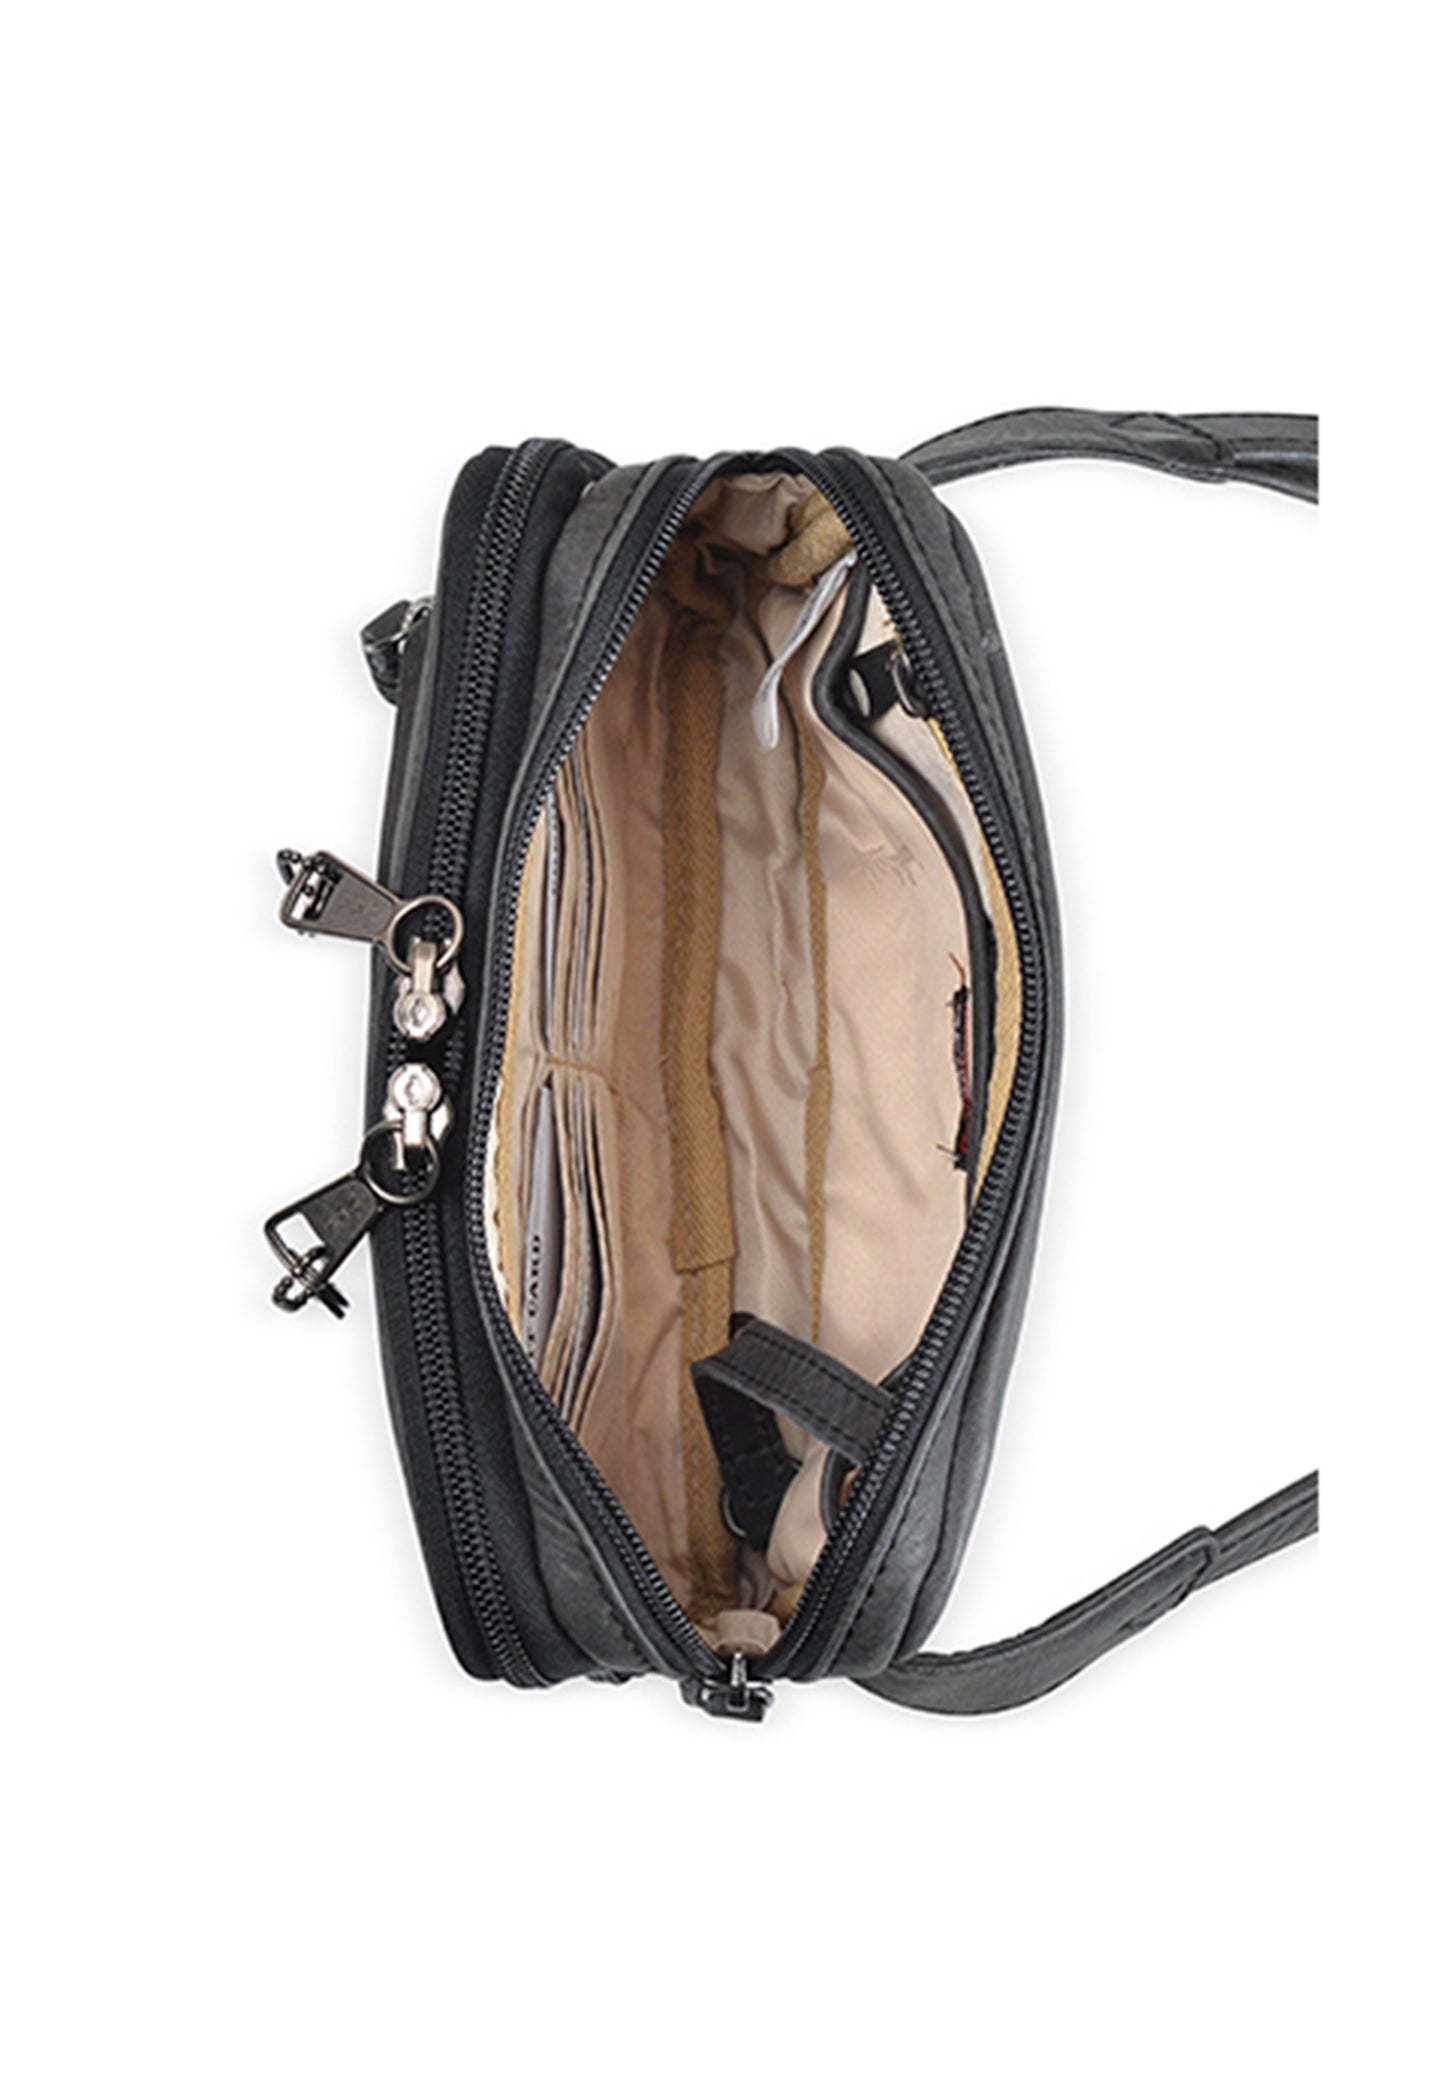 interior detail of leather concealed carry fanny pack for ladies